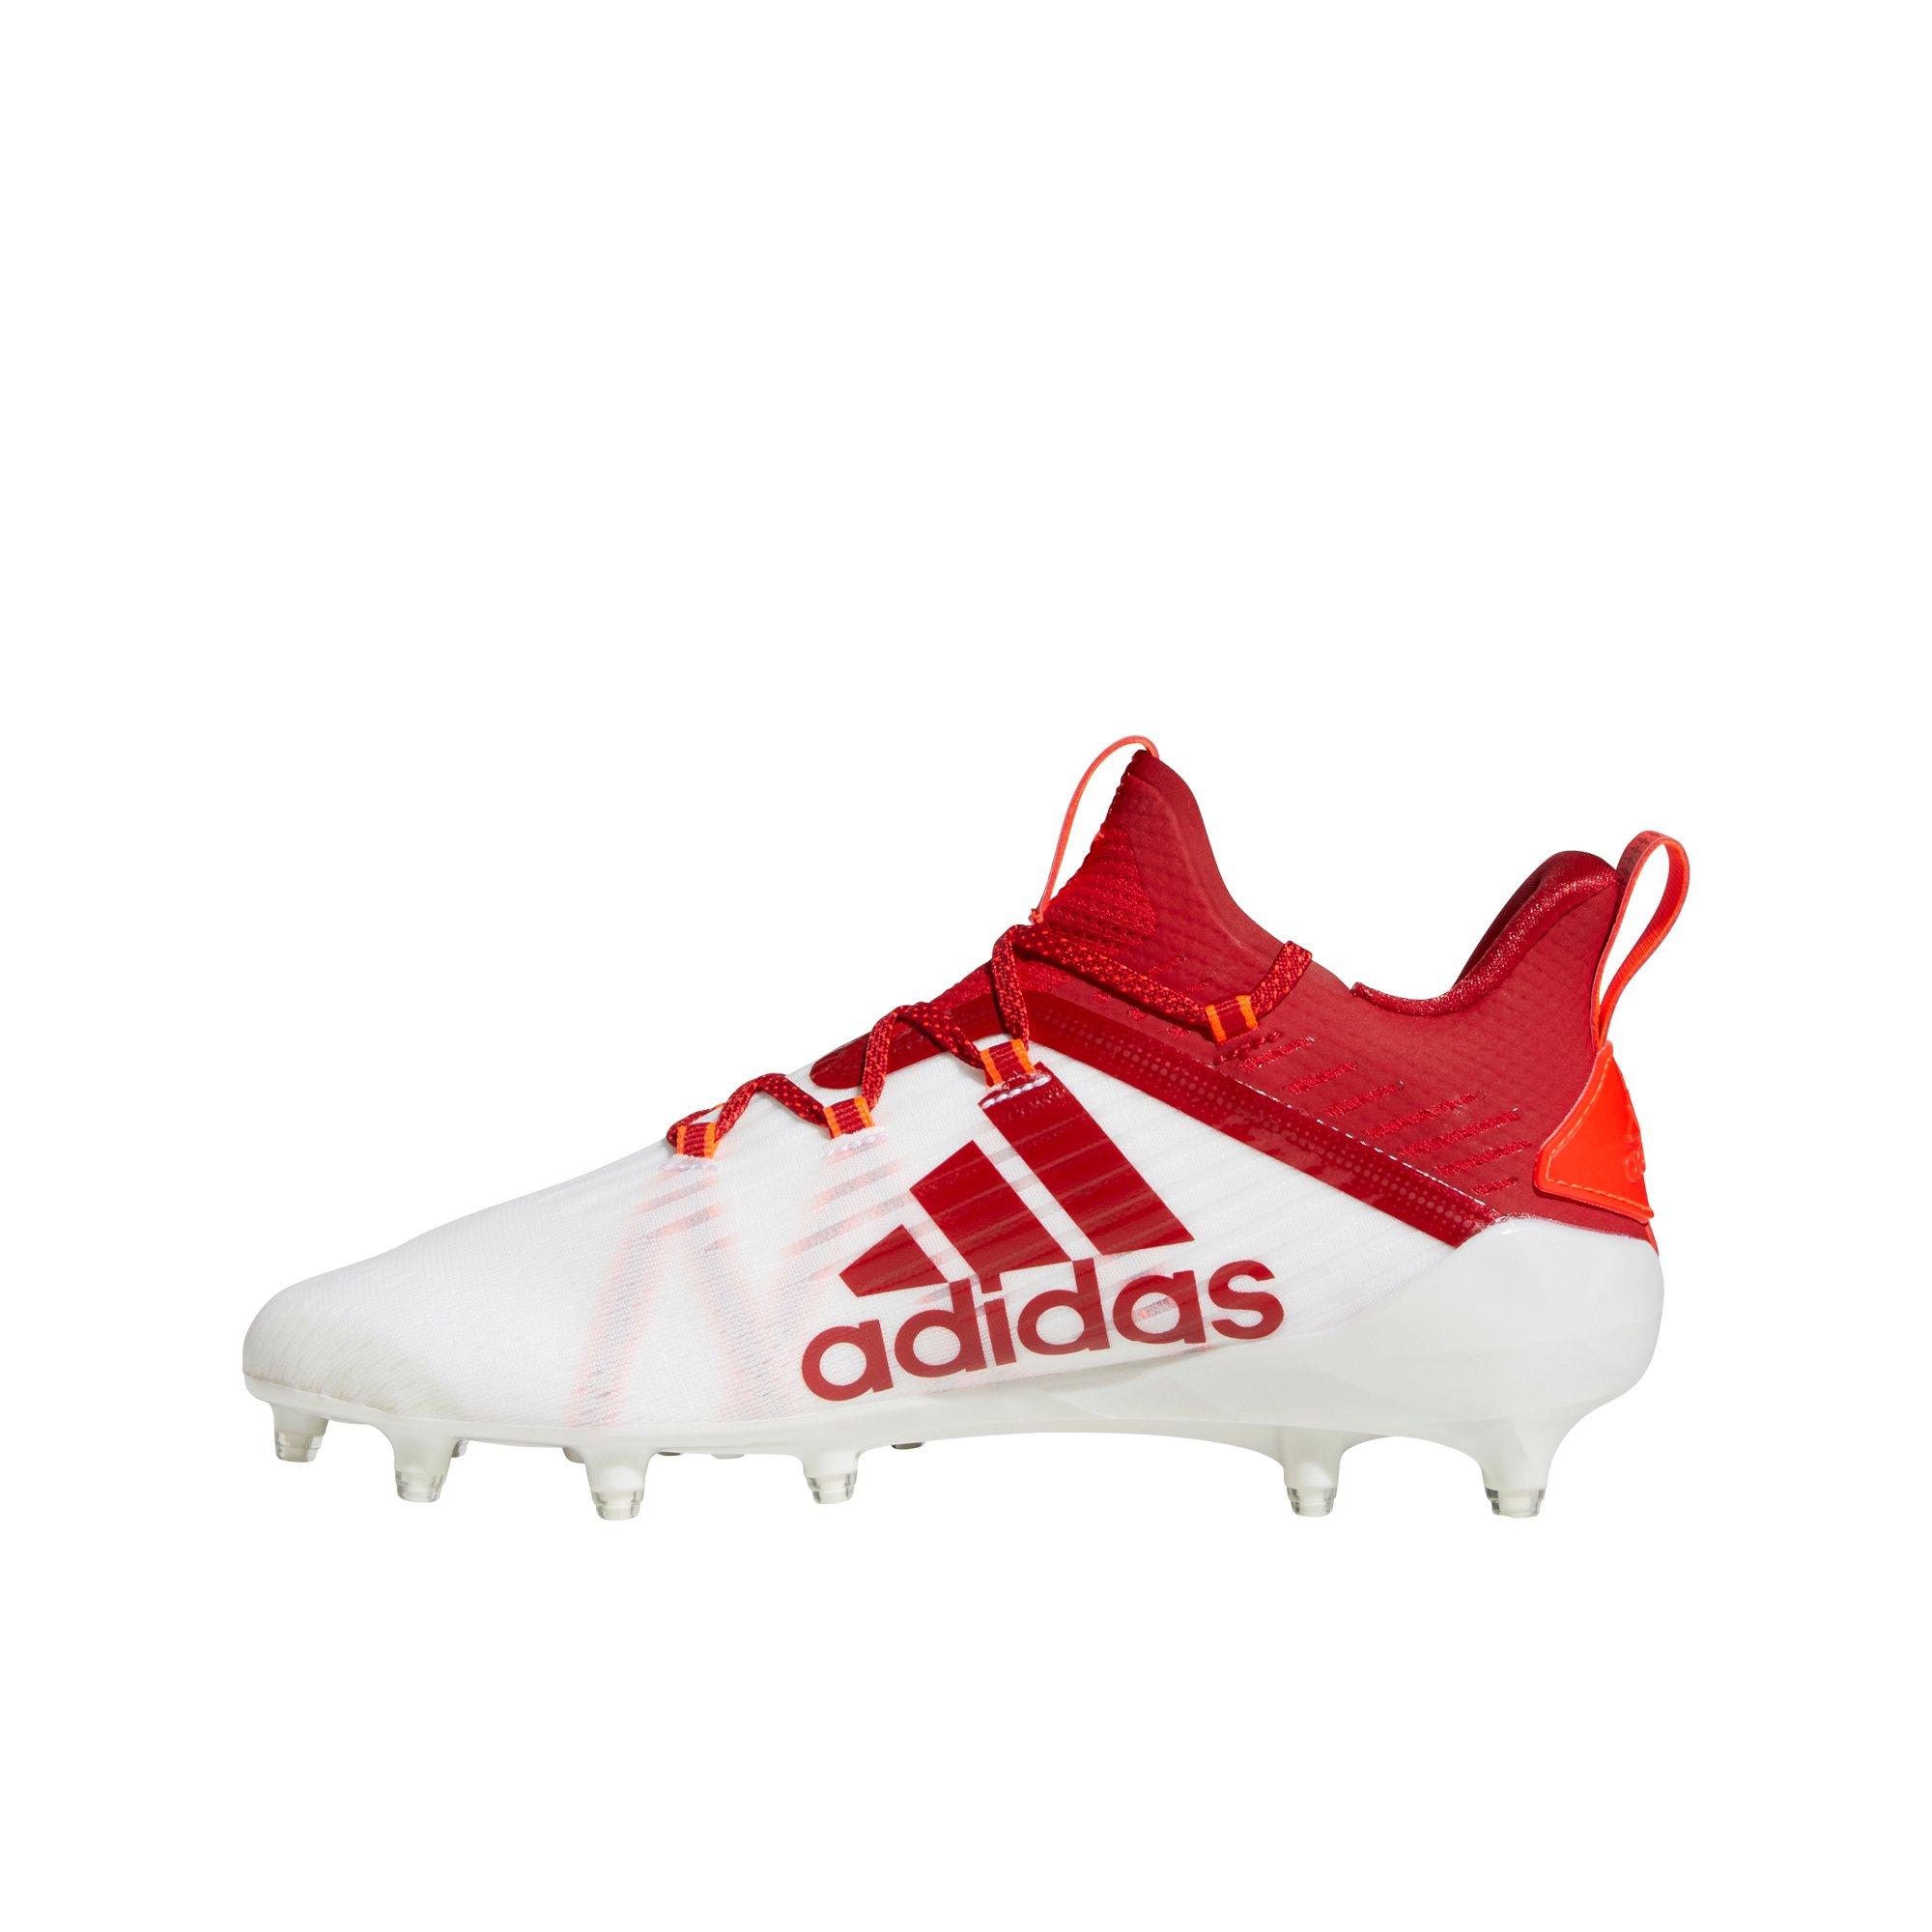 adidas cleats football red